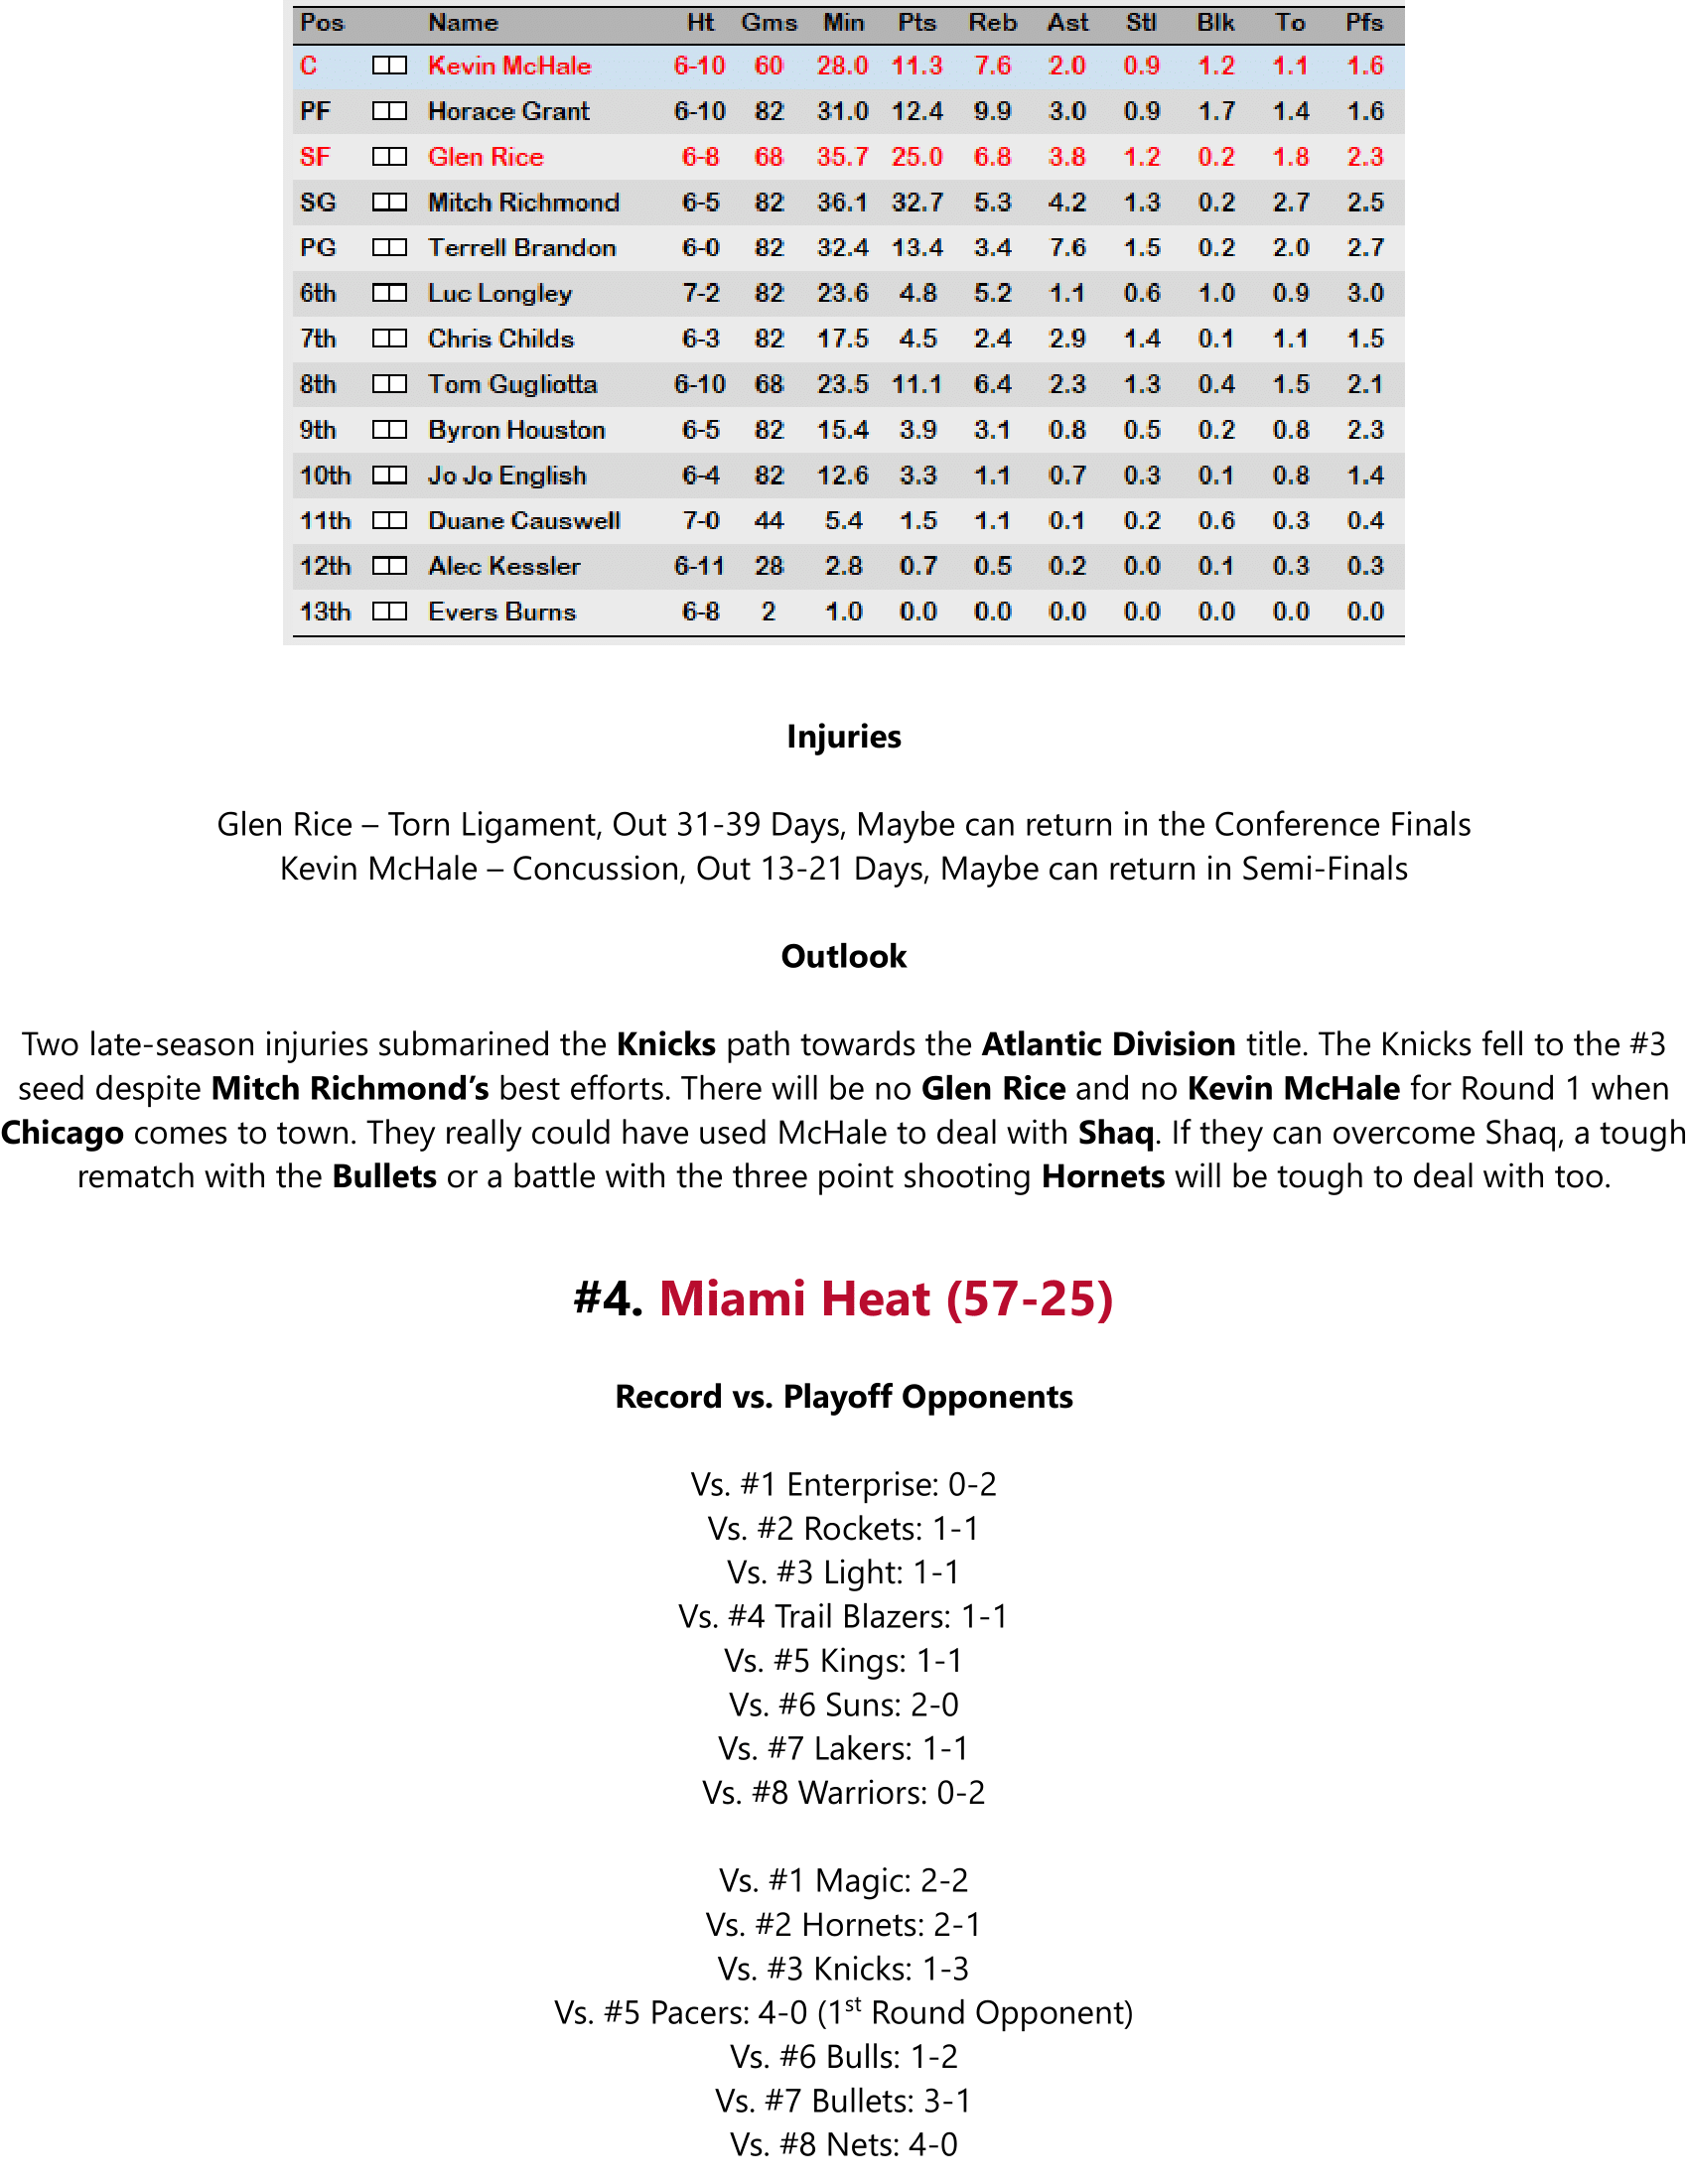 93-94-Part-4-Playoff-Preview-18.png